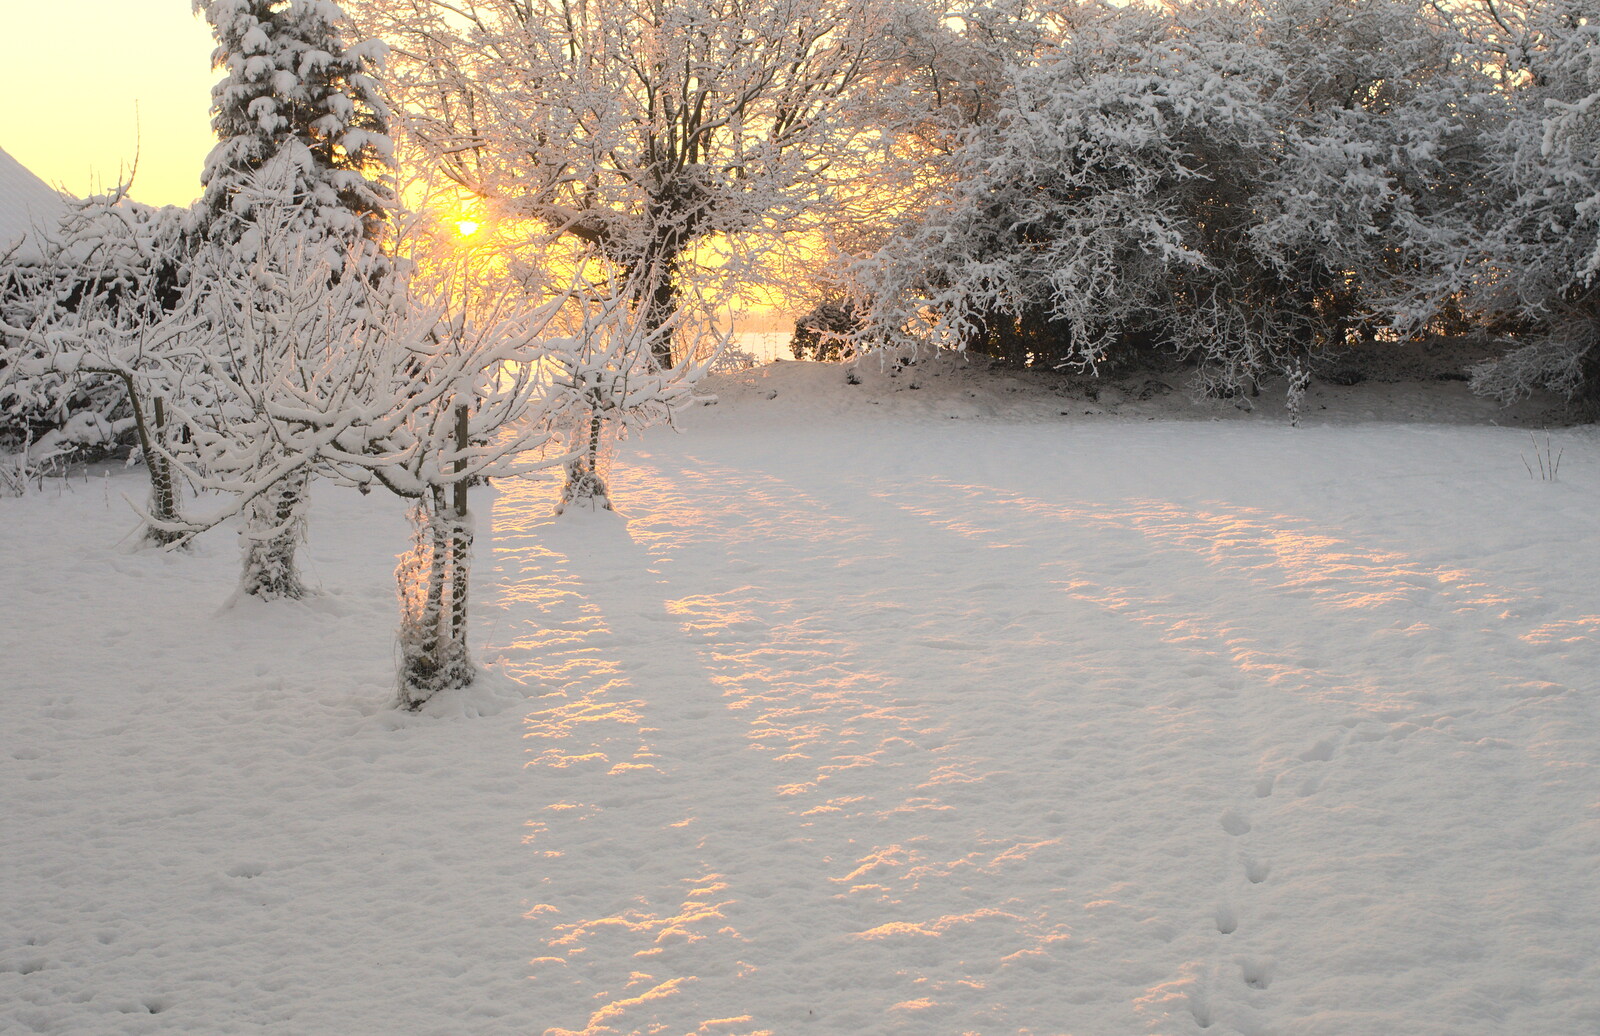 Sunrise on the snow from A Couple of Snow Days, Brome, Suffolk - 16th January 2013